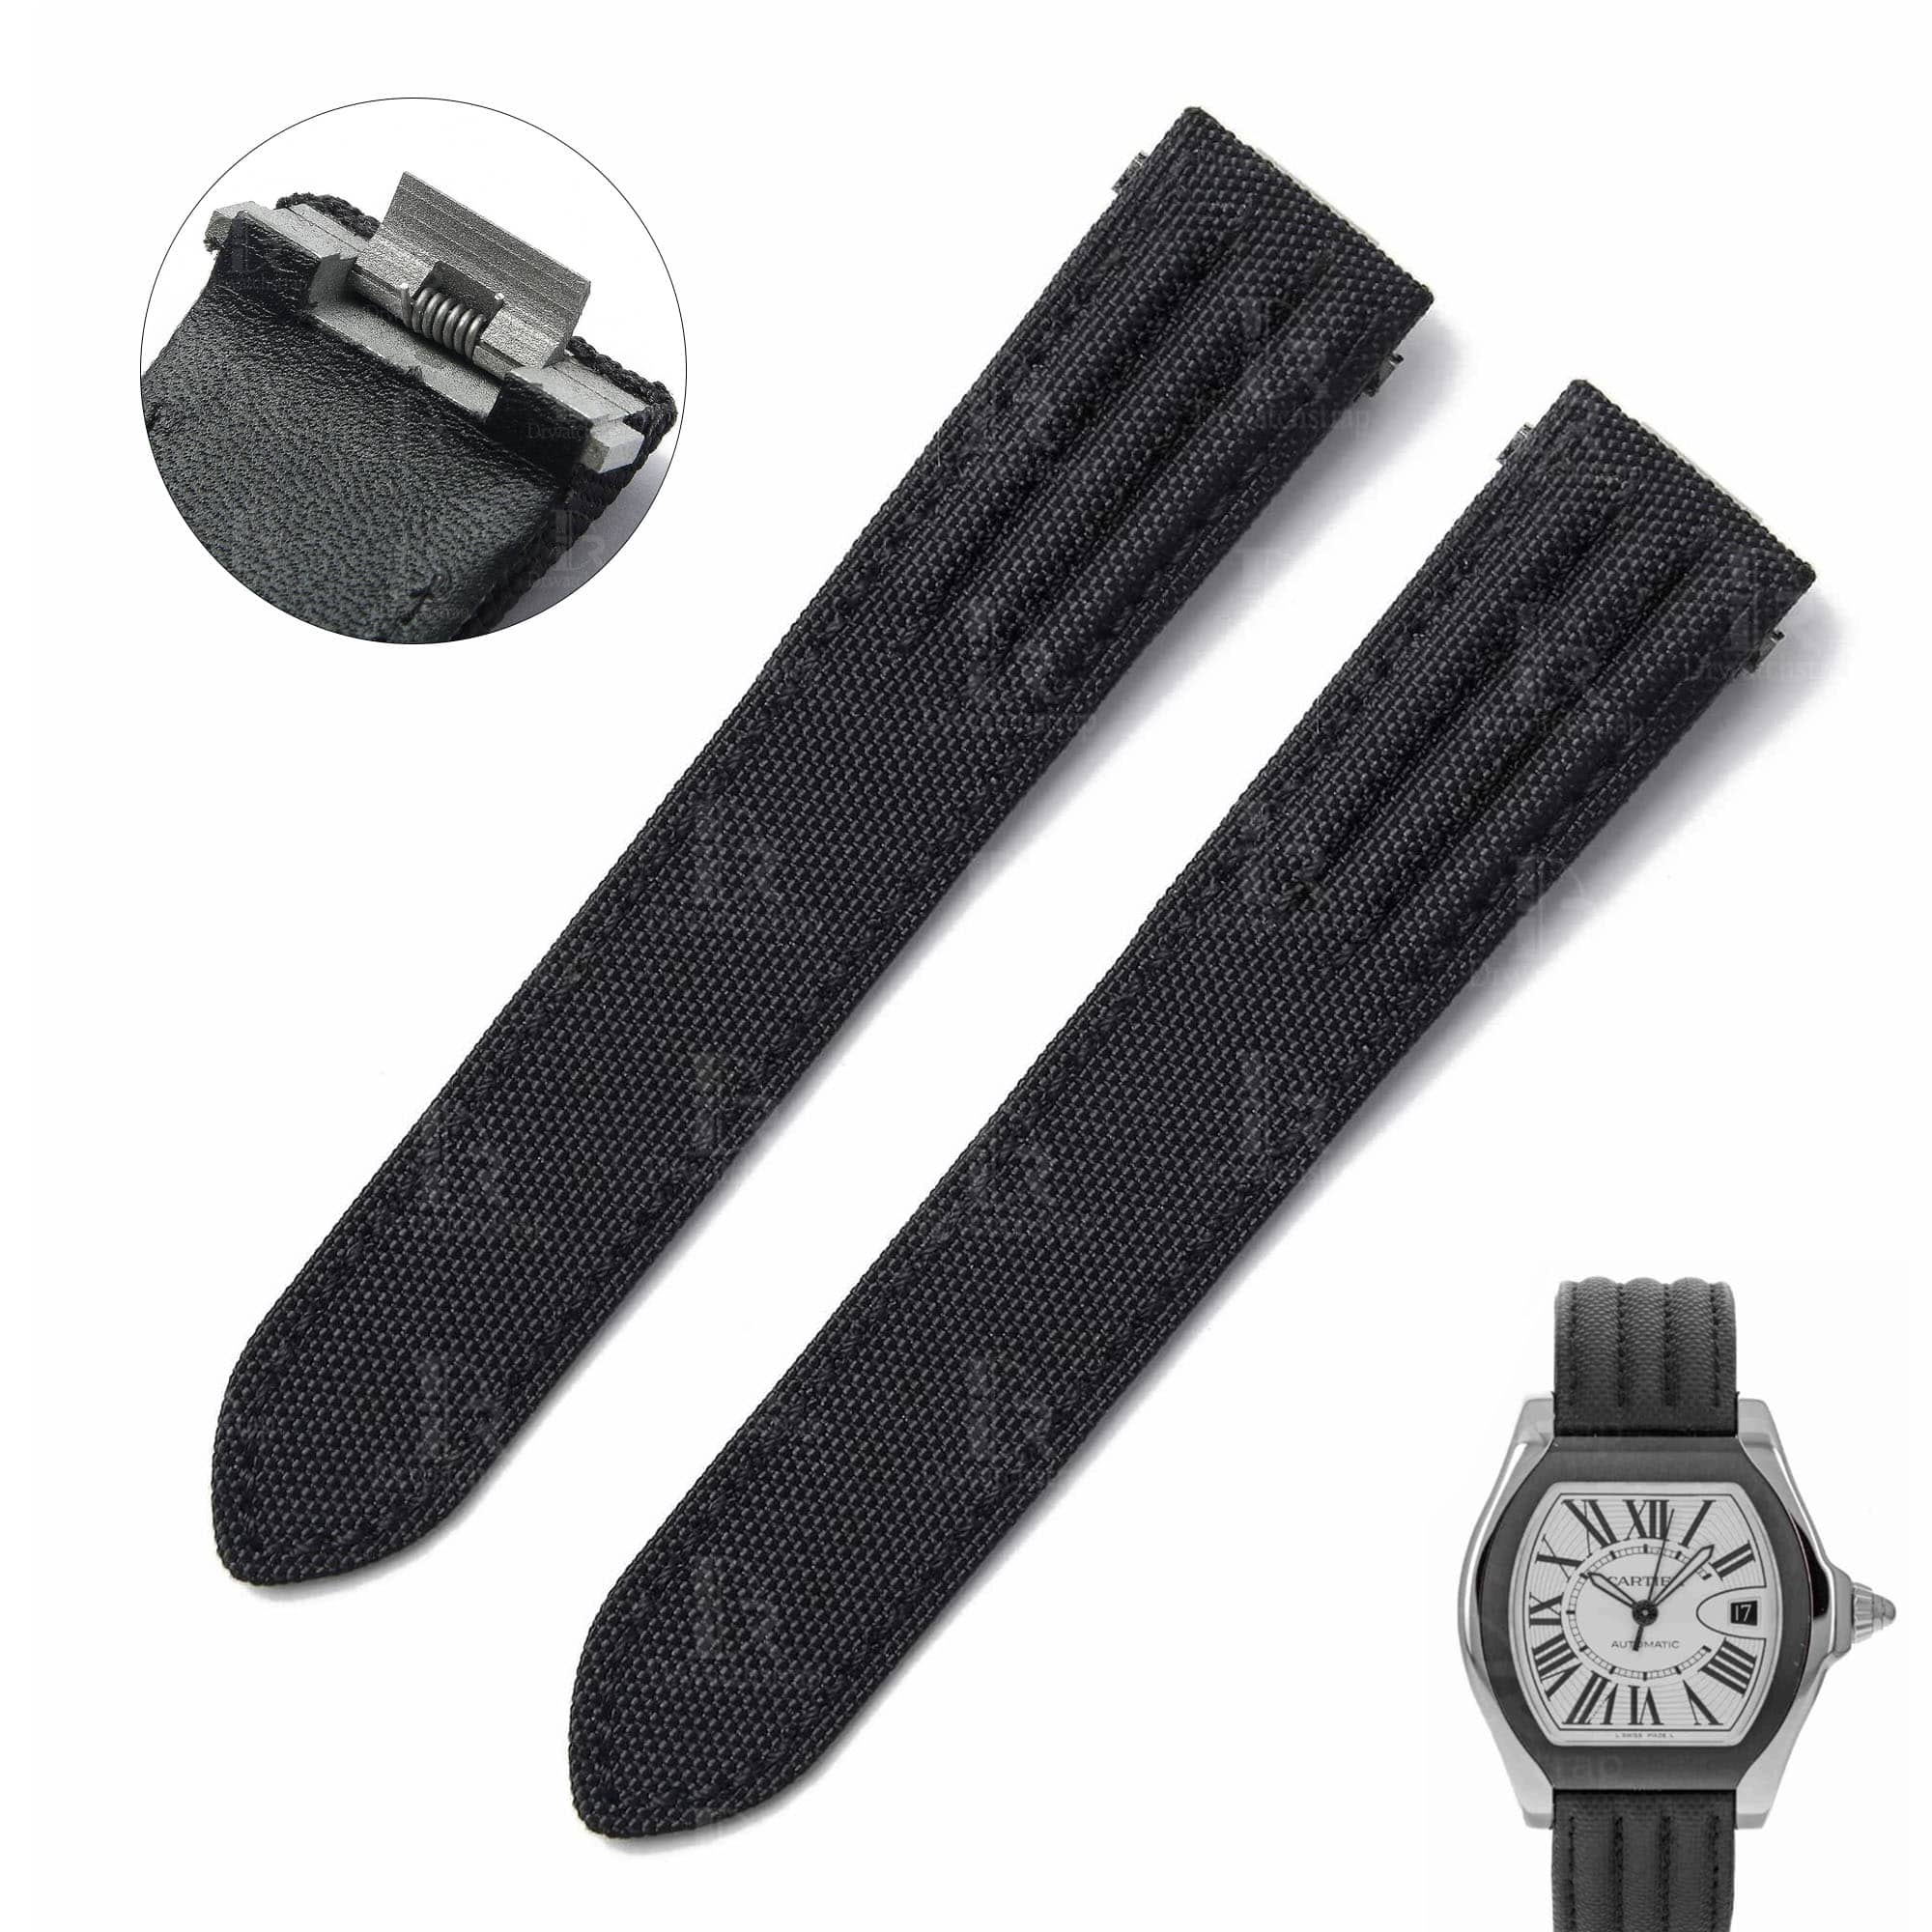 Custom best quality black kevlar canvas nylon Quickswitch handmade strap and watch band fabric replacement for Cartier Roadster 2510 xl Chronograph Non-Chronograph men's and women's 19mm 20mm watches for sale, quick change - Shop the best canvas nylon watch straps and watch bands from DR Watchstrap Quick release at a low price free shipping to US, UK and all over the world